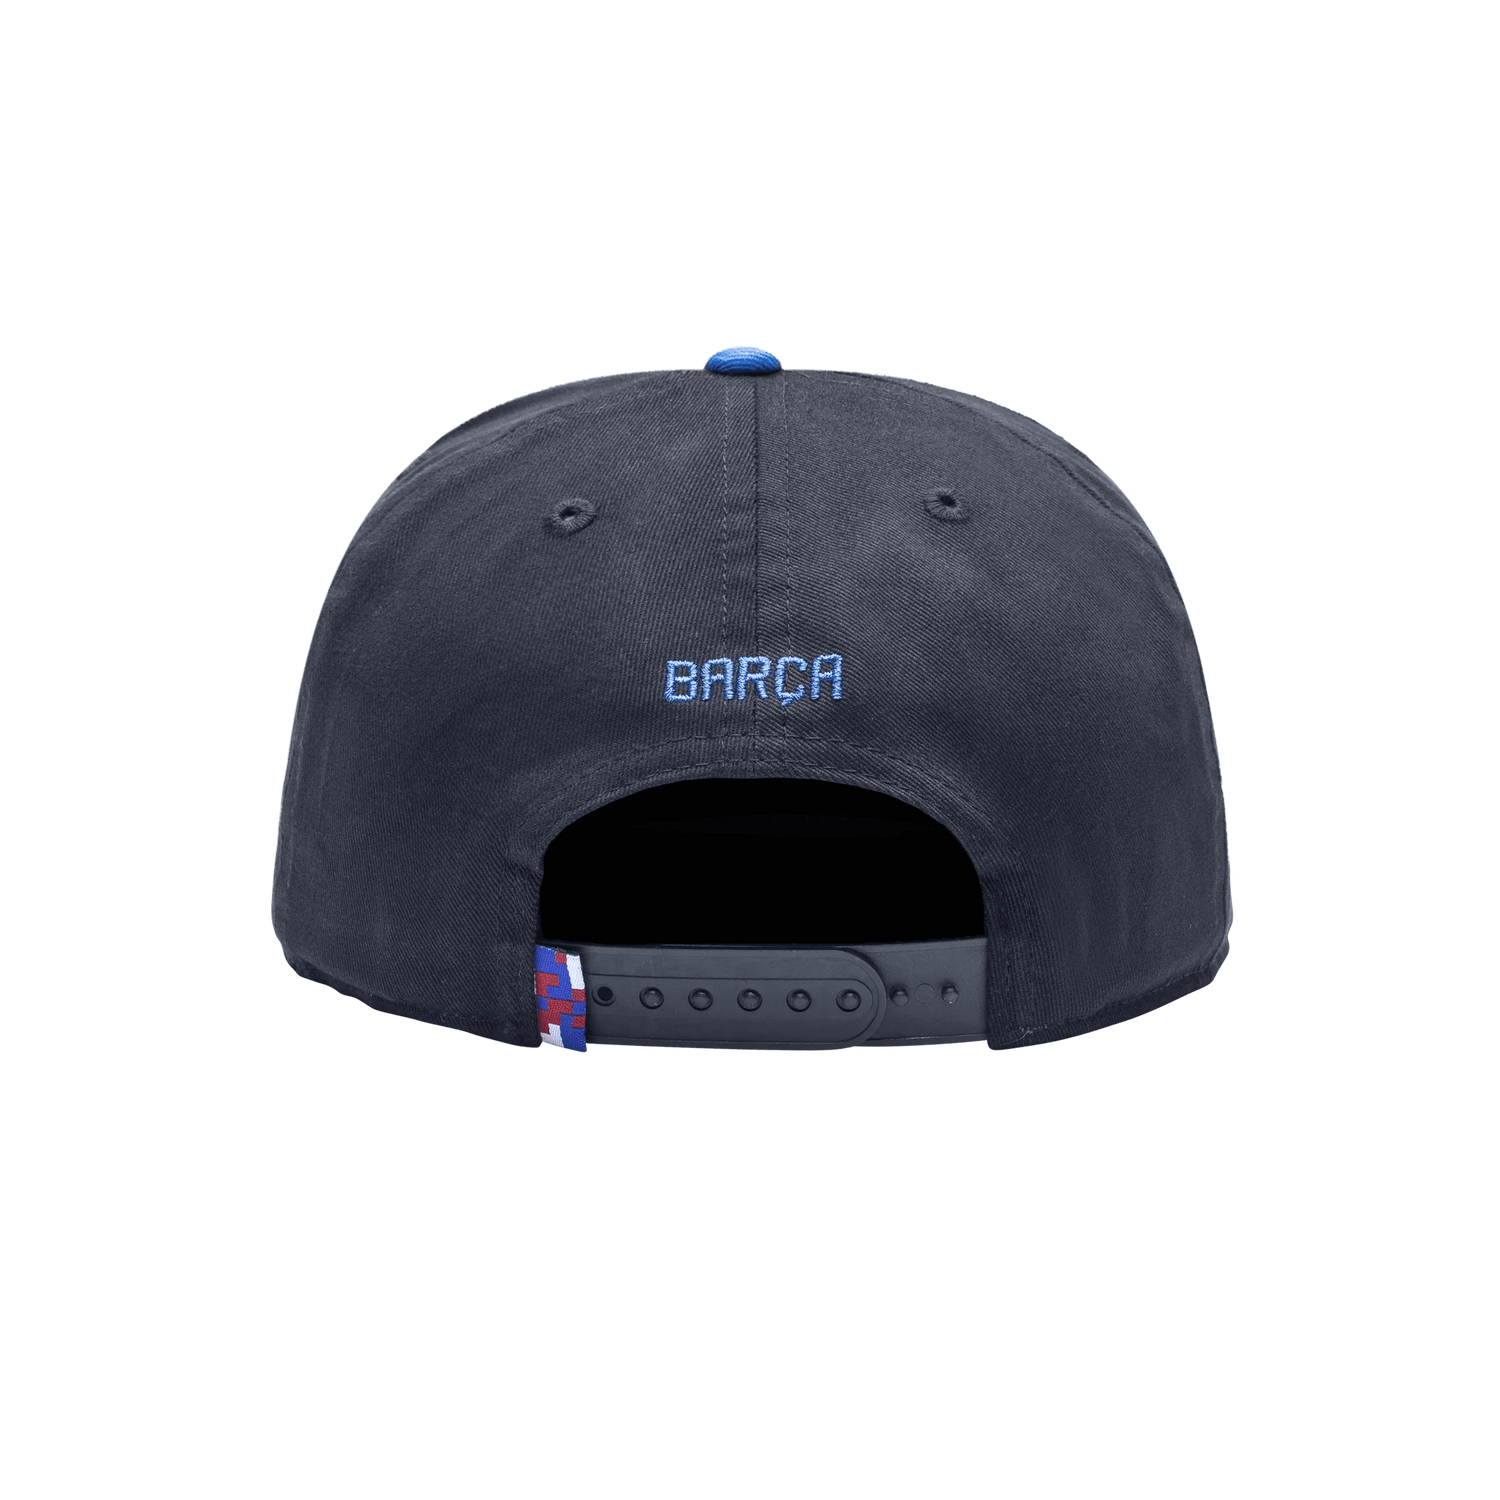 FI Collection Barcelona Locale Snapchat Hat (Back)